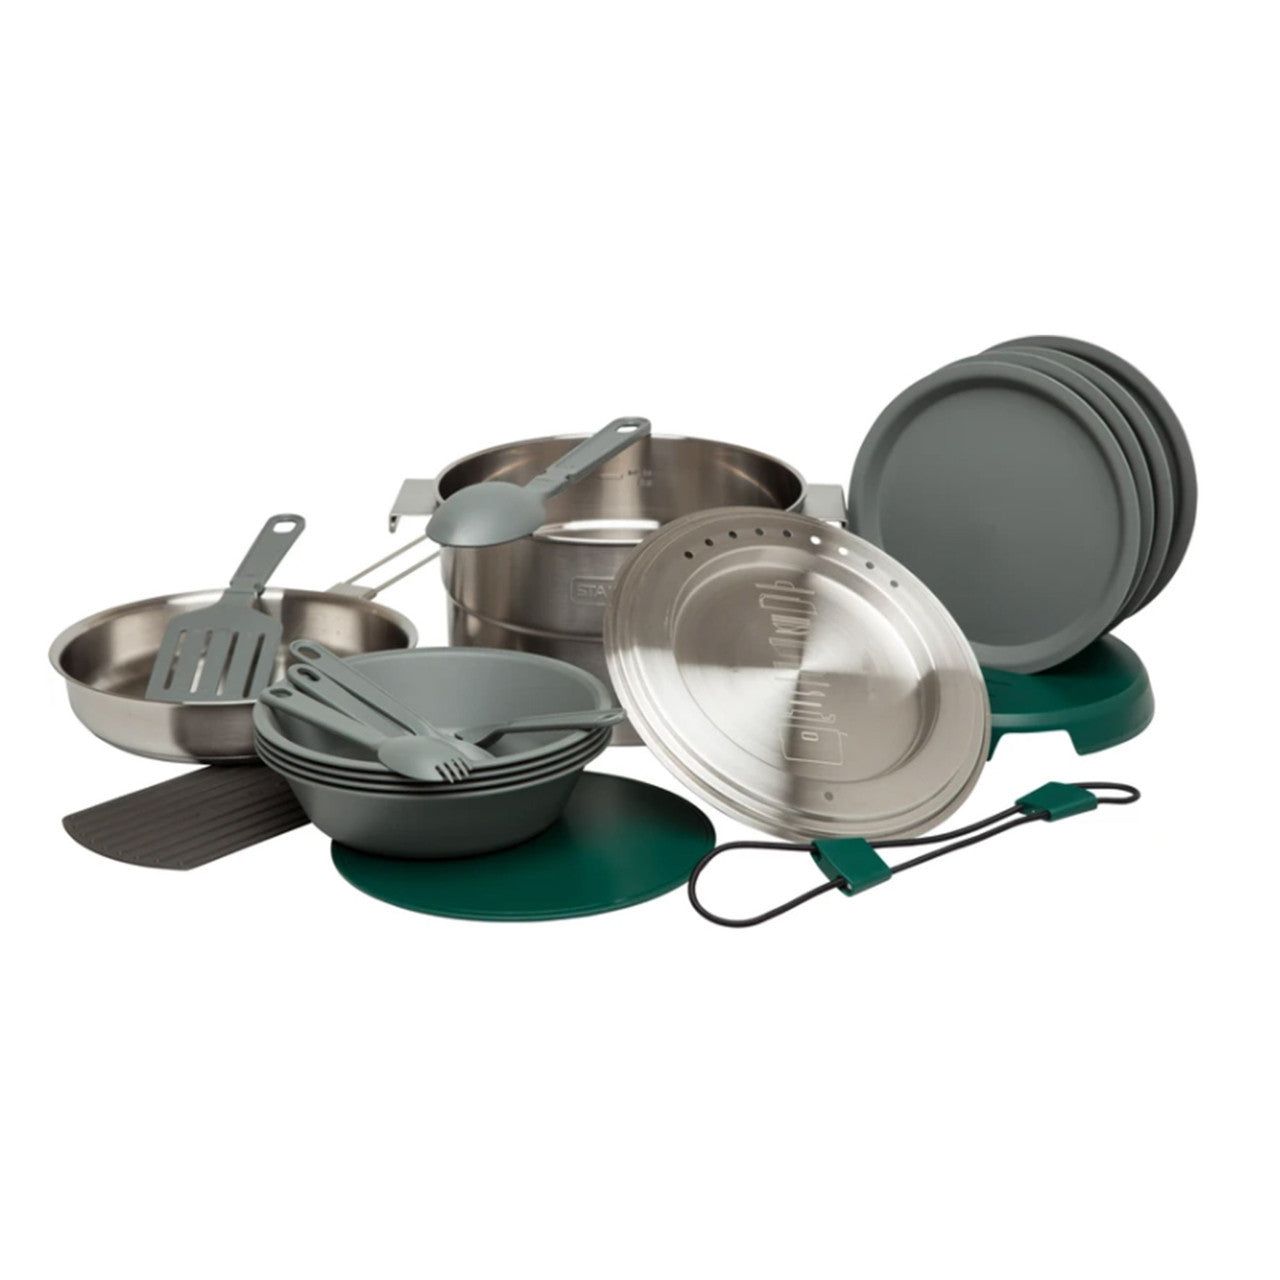 Stanley Base Camp Stainless Steel Cooking Set